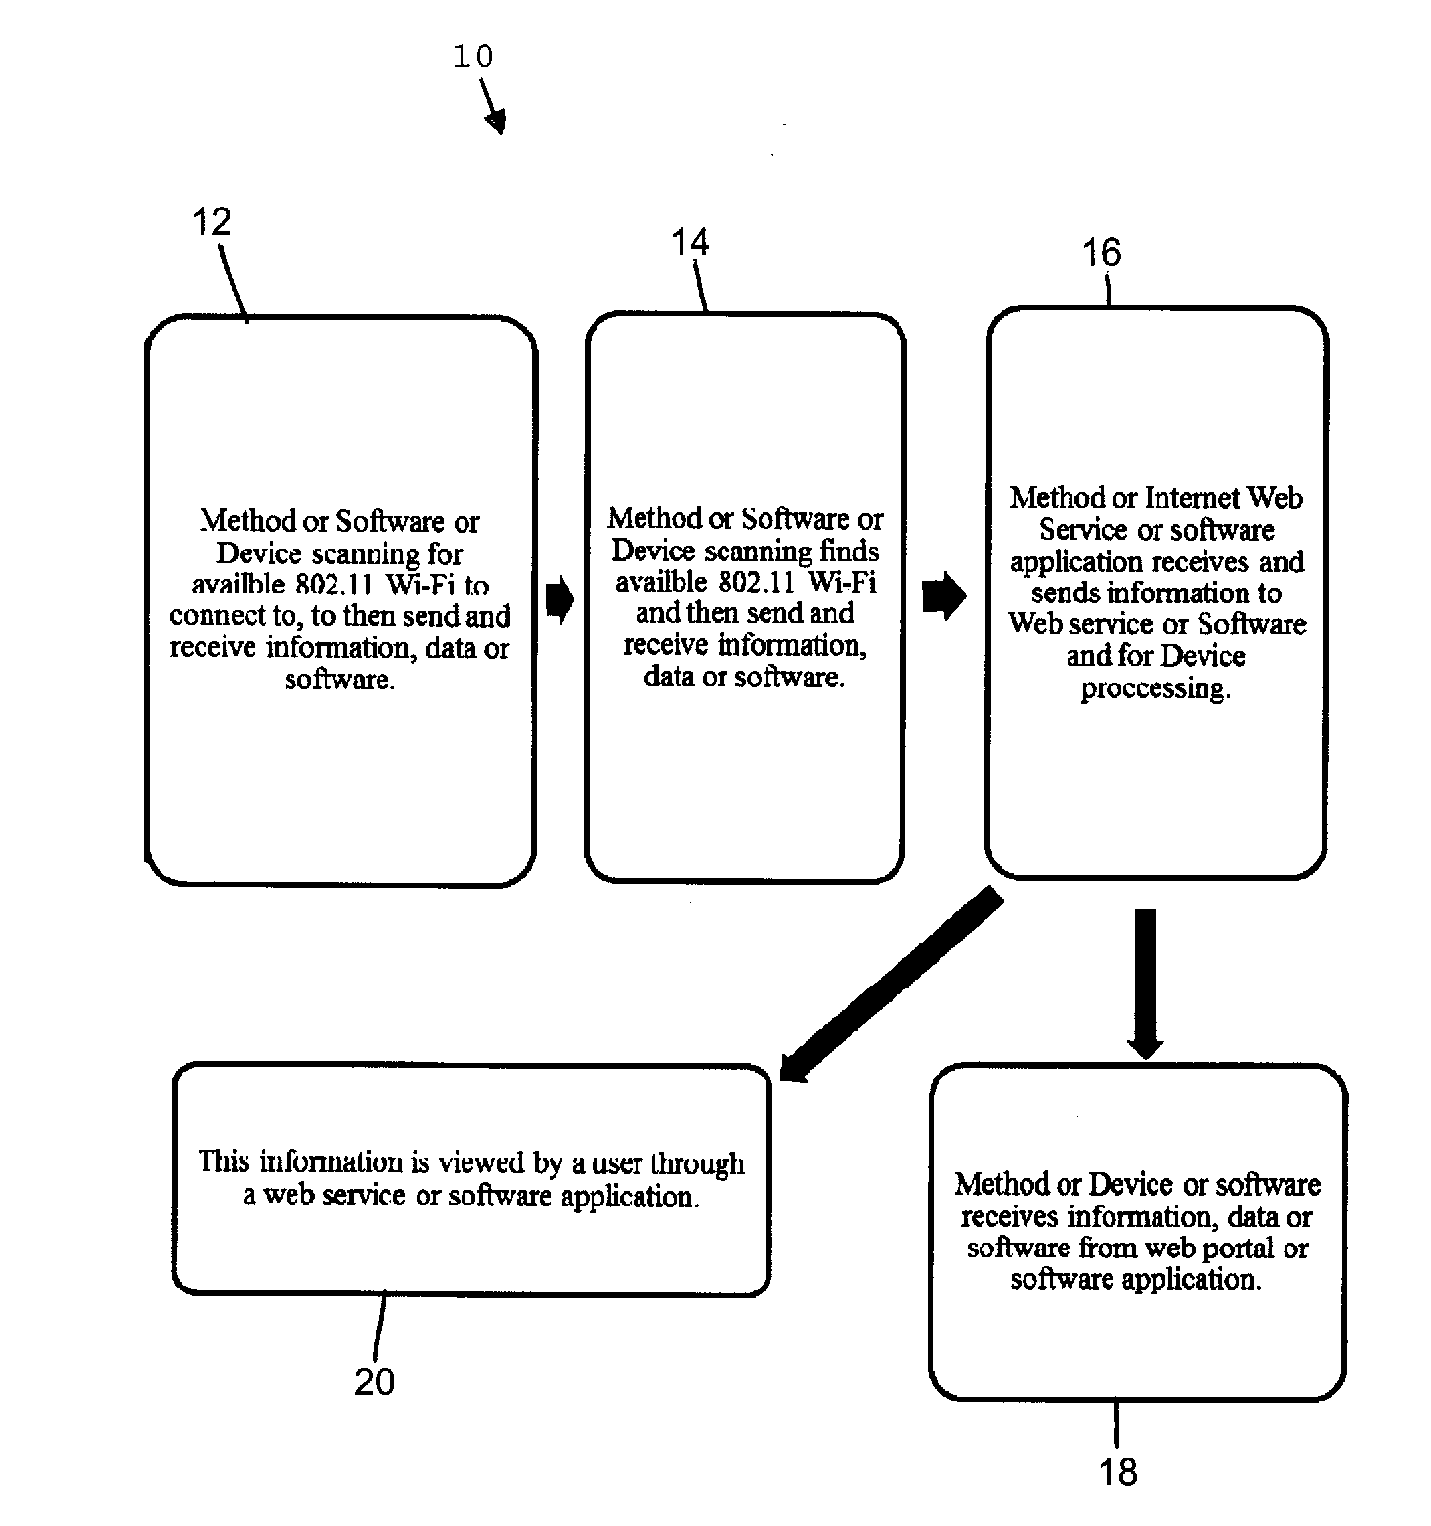 System for connecting to wireless local area networks while in motion to send and receive GPS data and other information to a web portal or software application